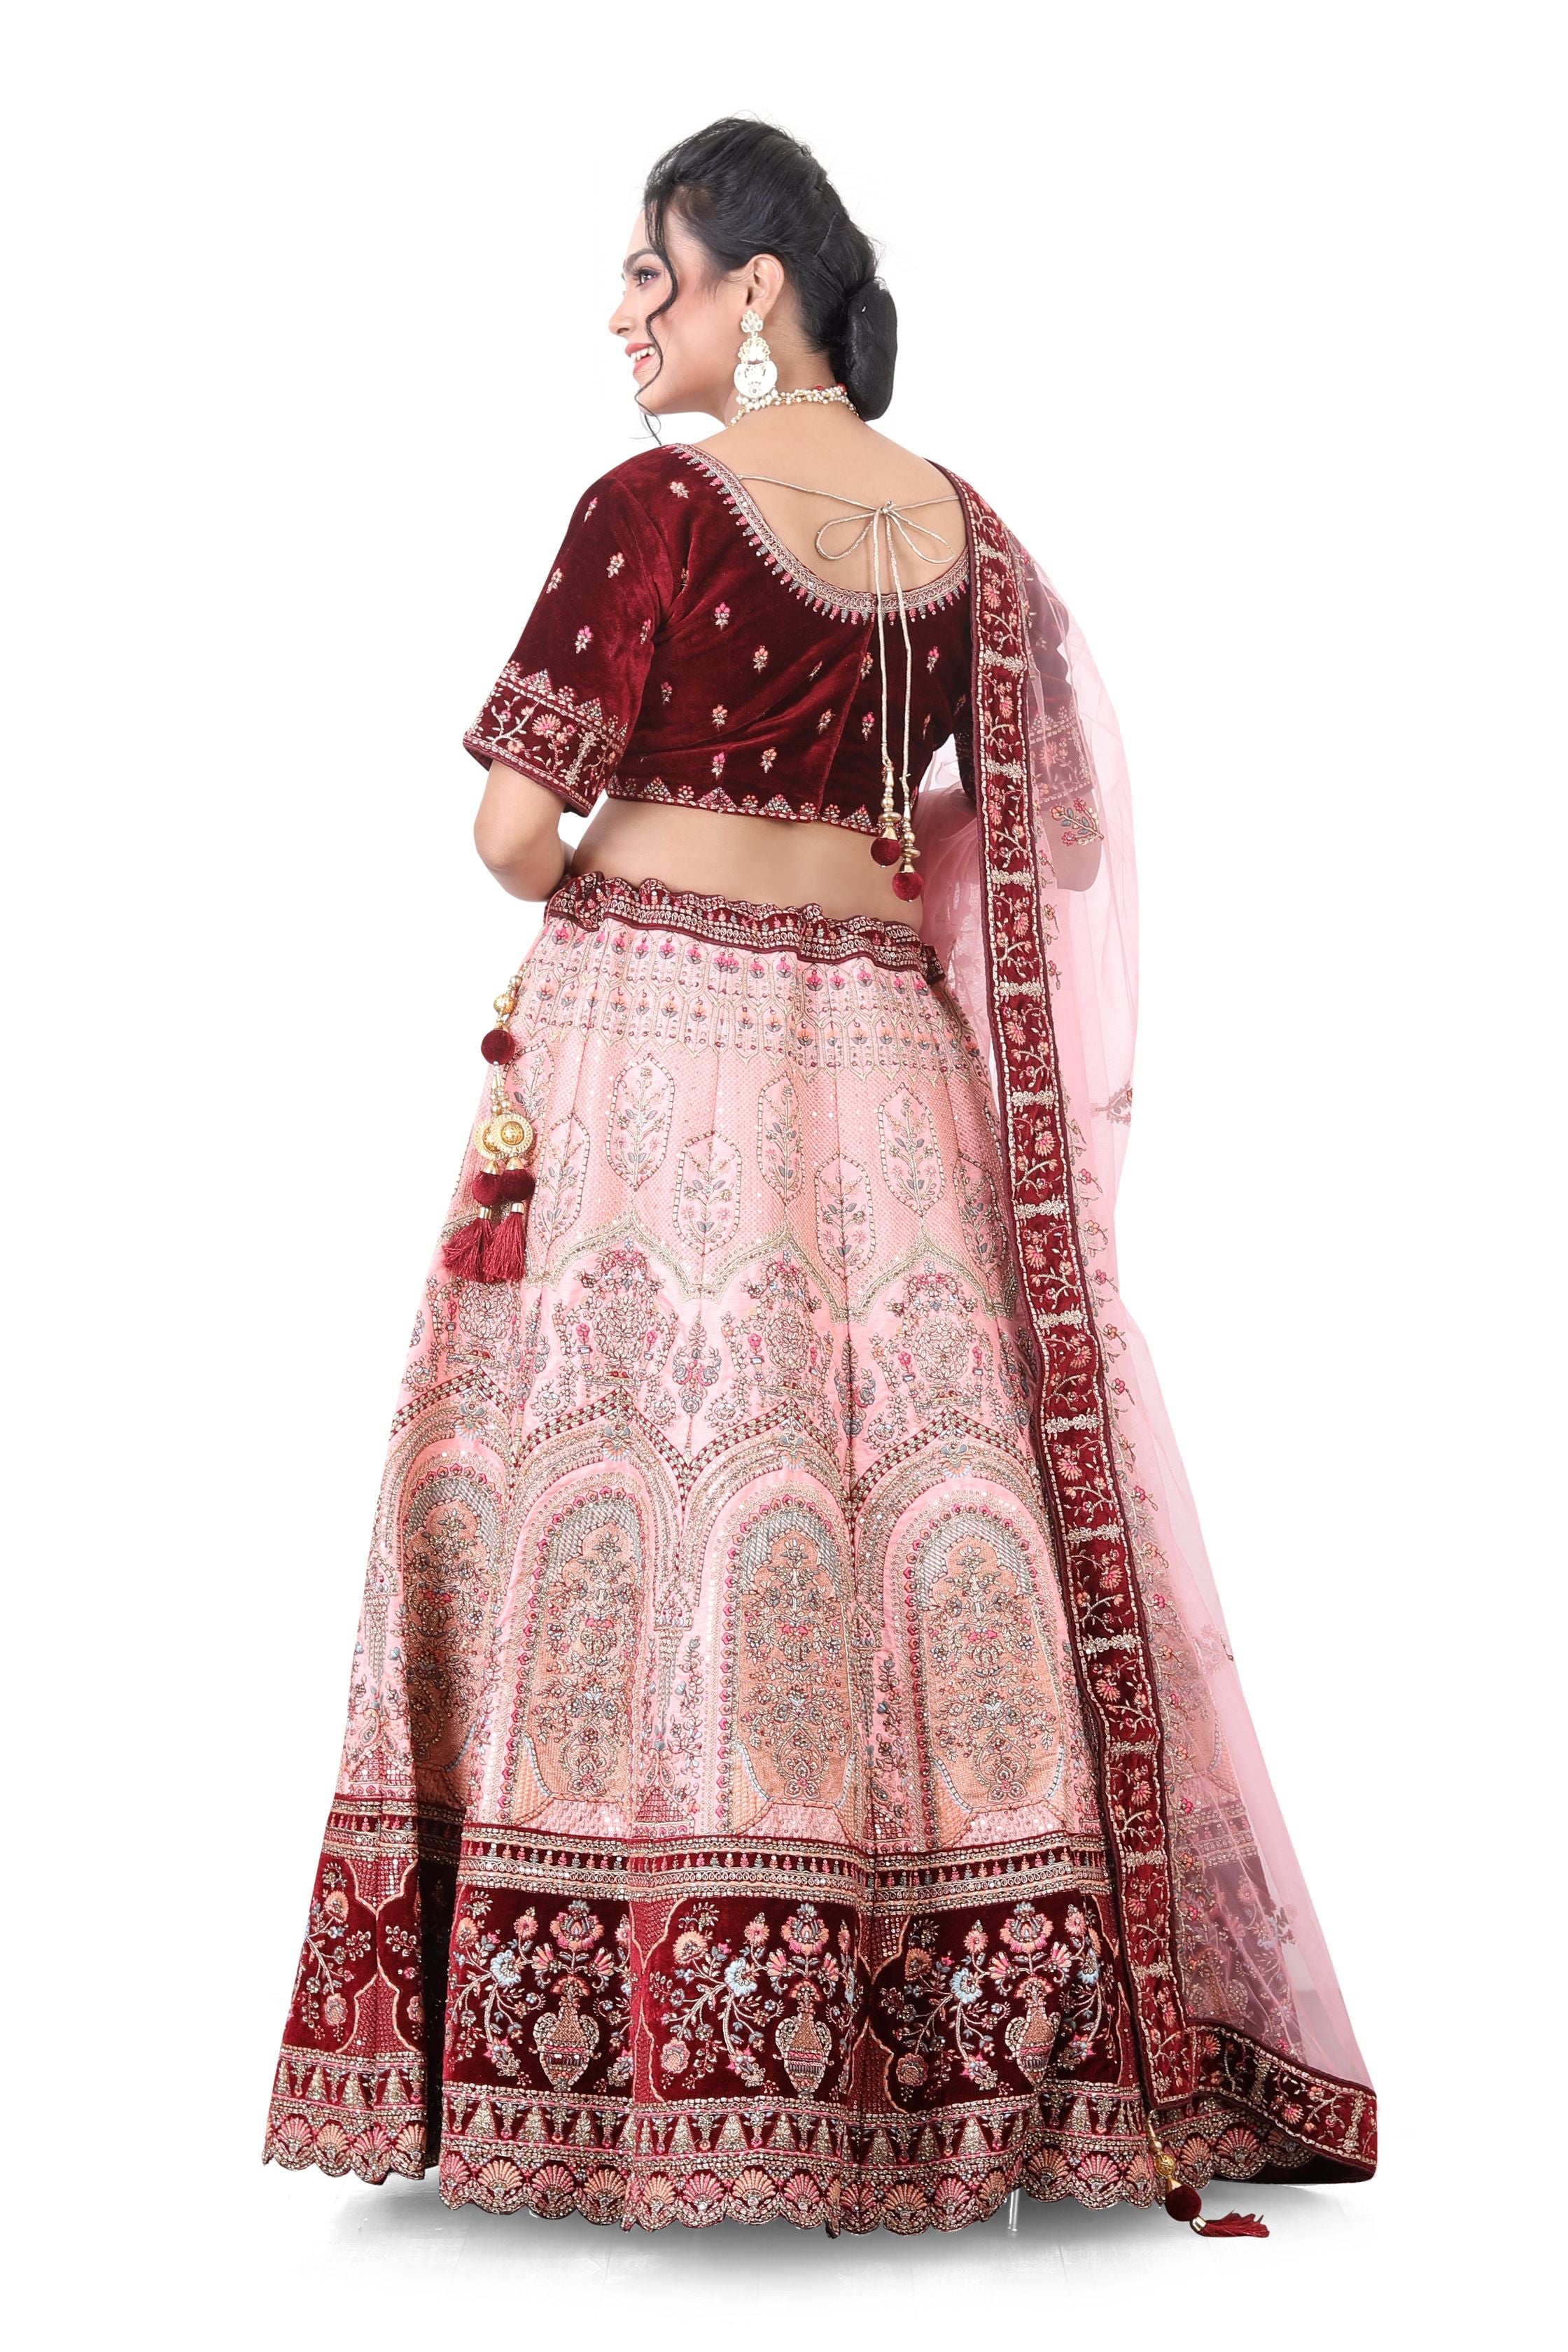 Bridal Lehenga Choli in Maroon with Baby pink Color